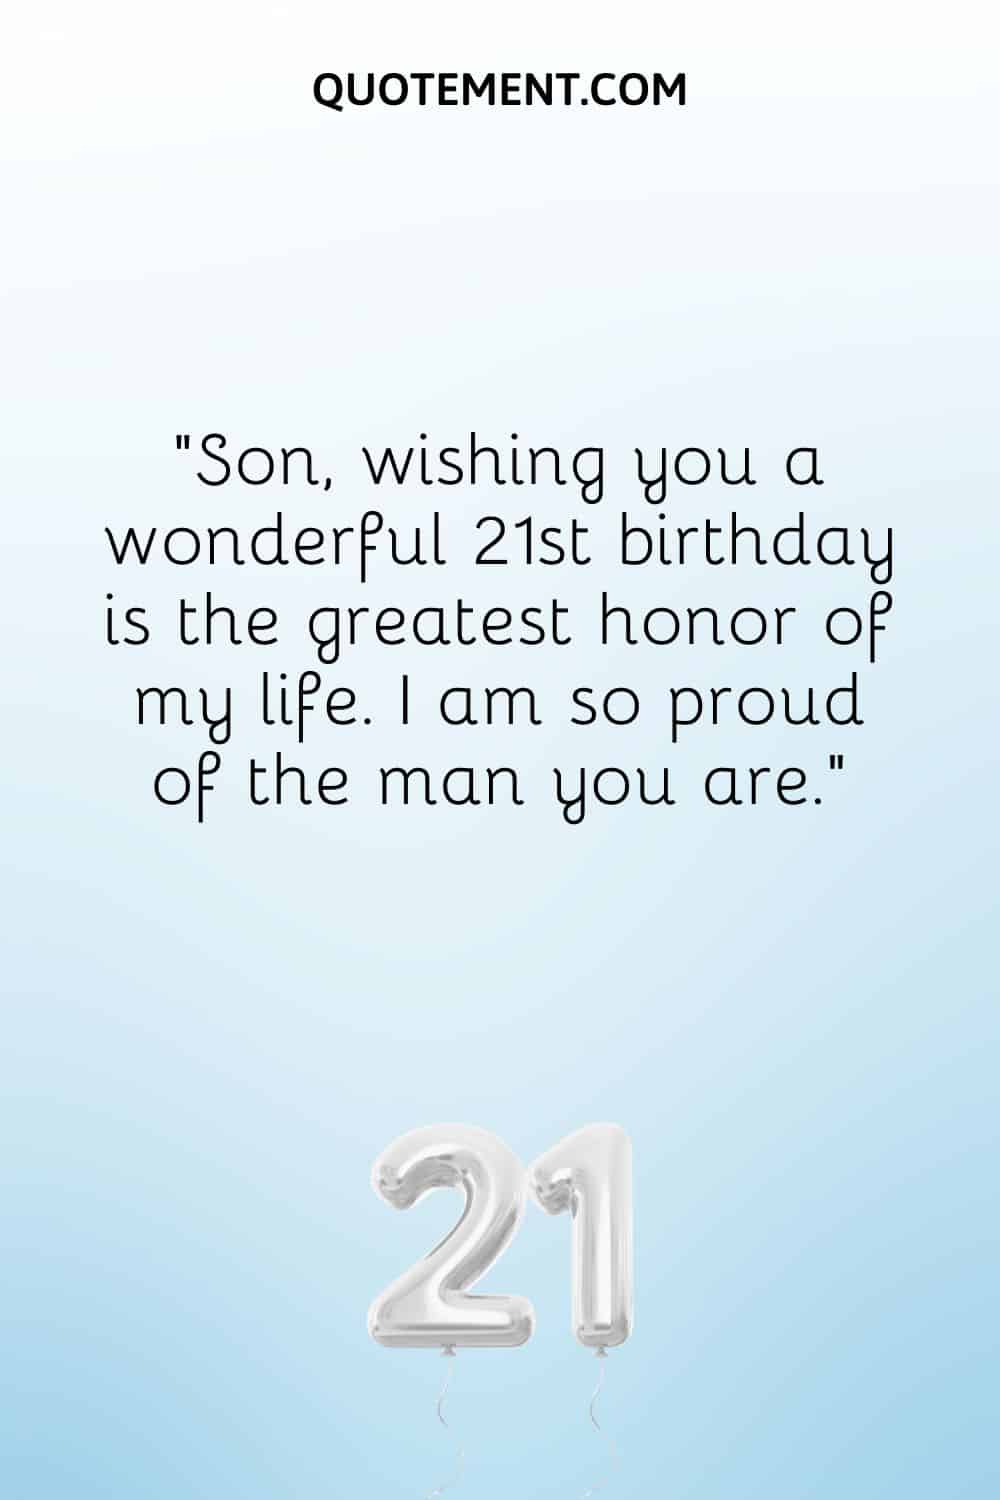 Son, wishing you a wonderful 21st birthday is the greatest honor of my life